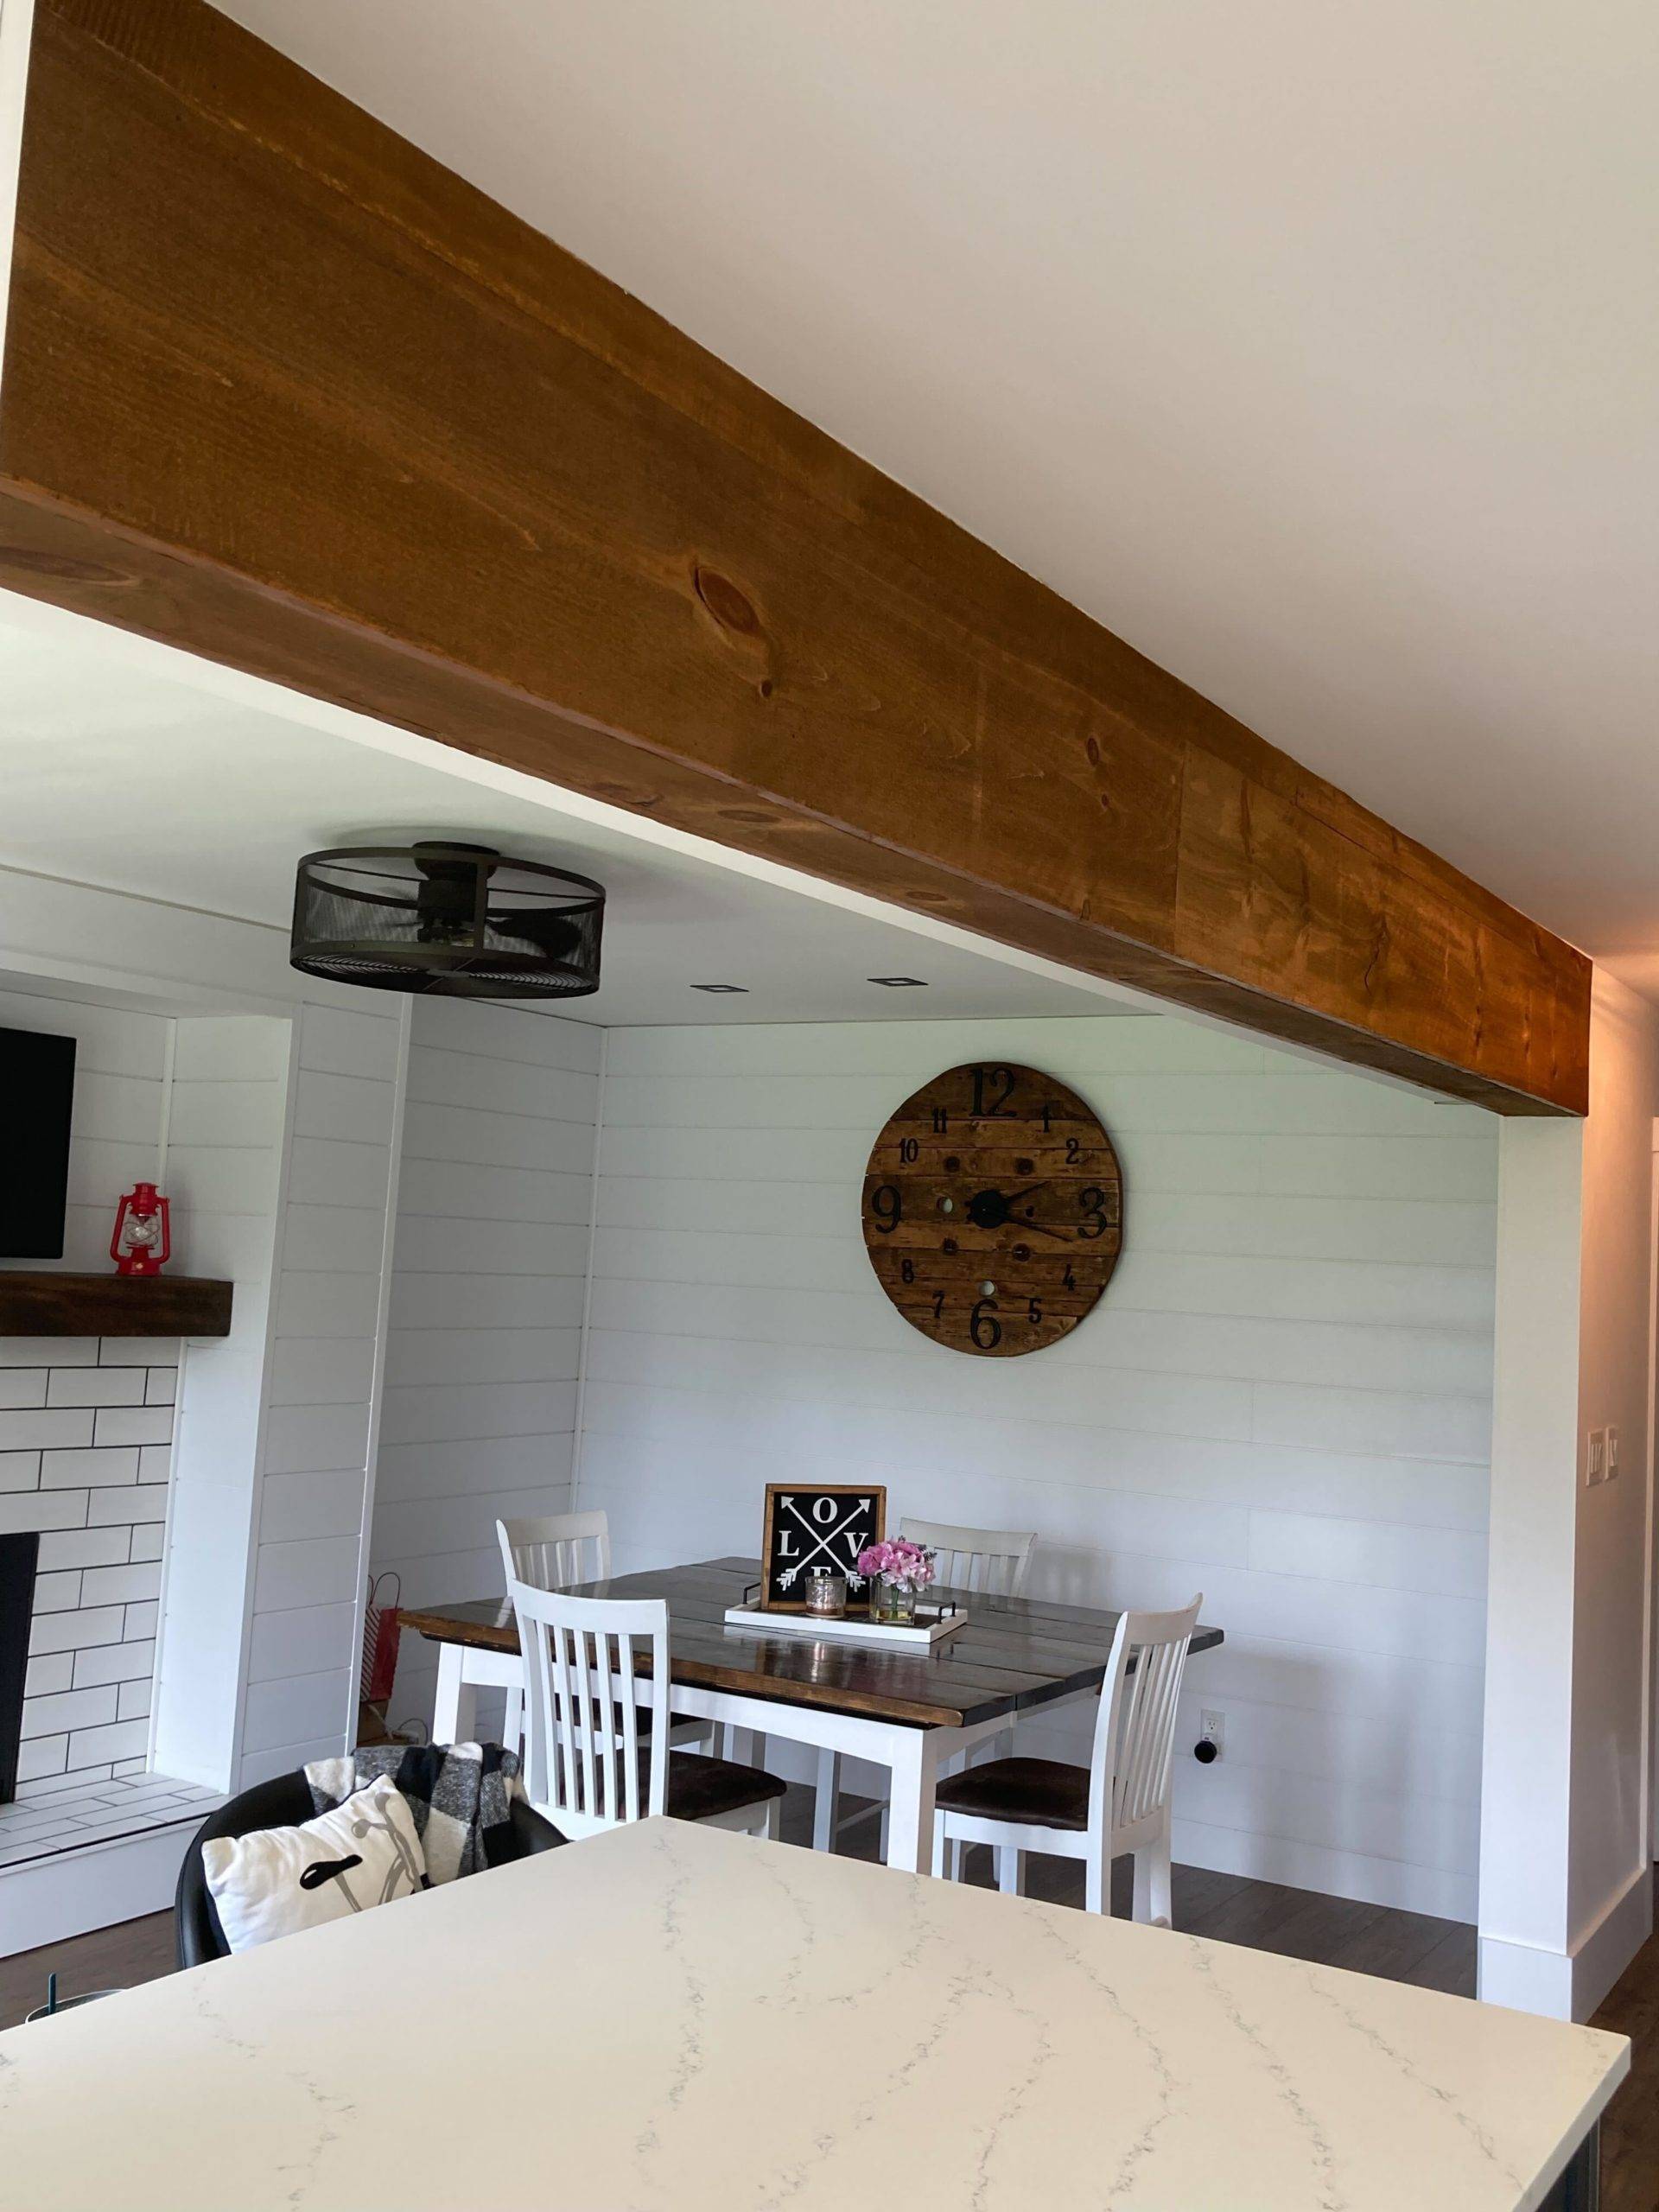 wooden ceiling beam over kitchen counter